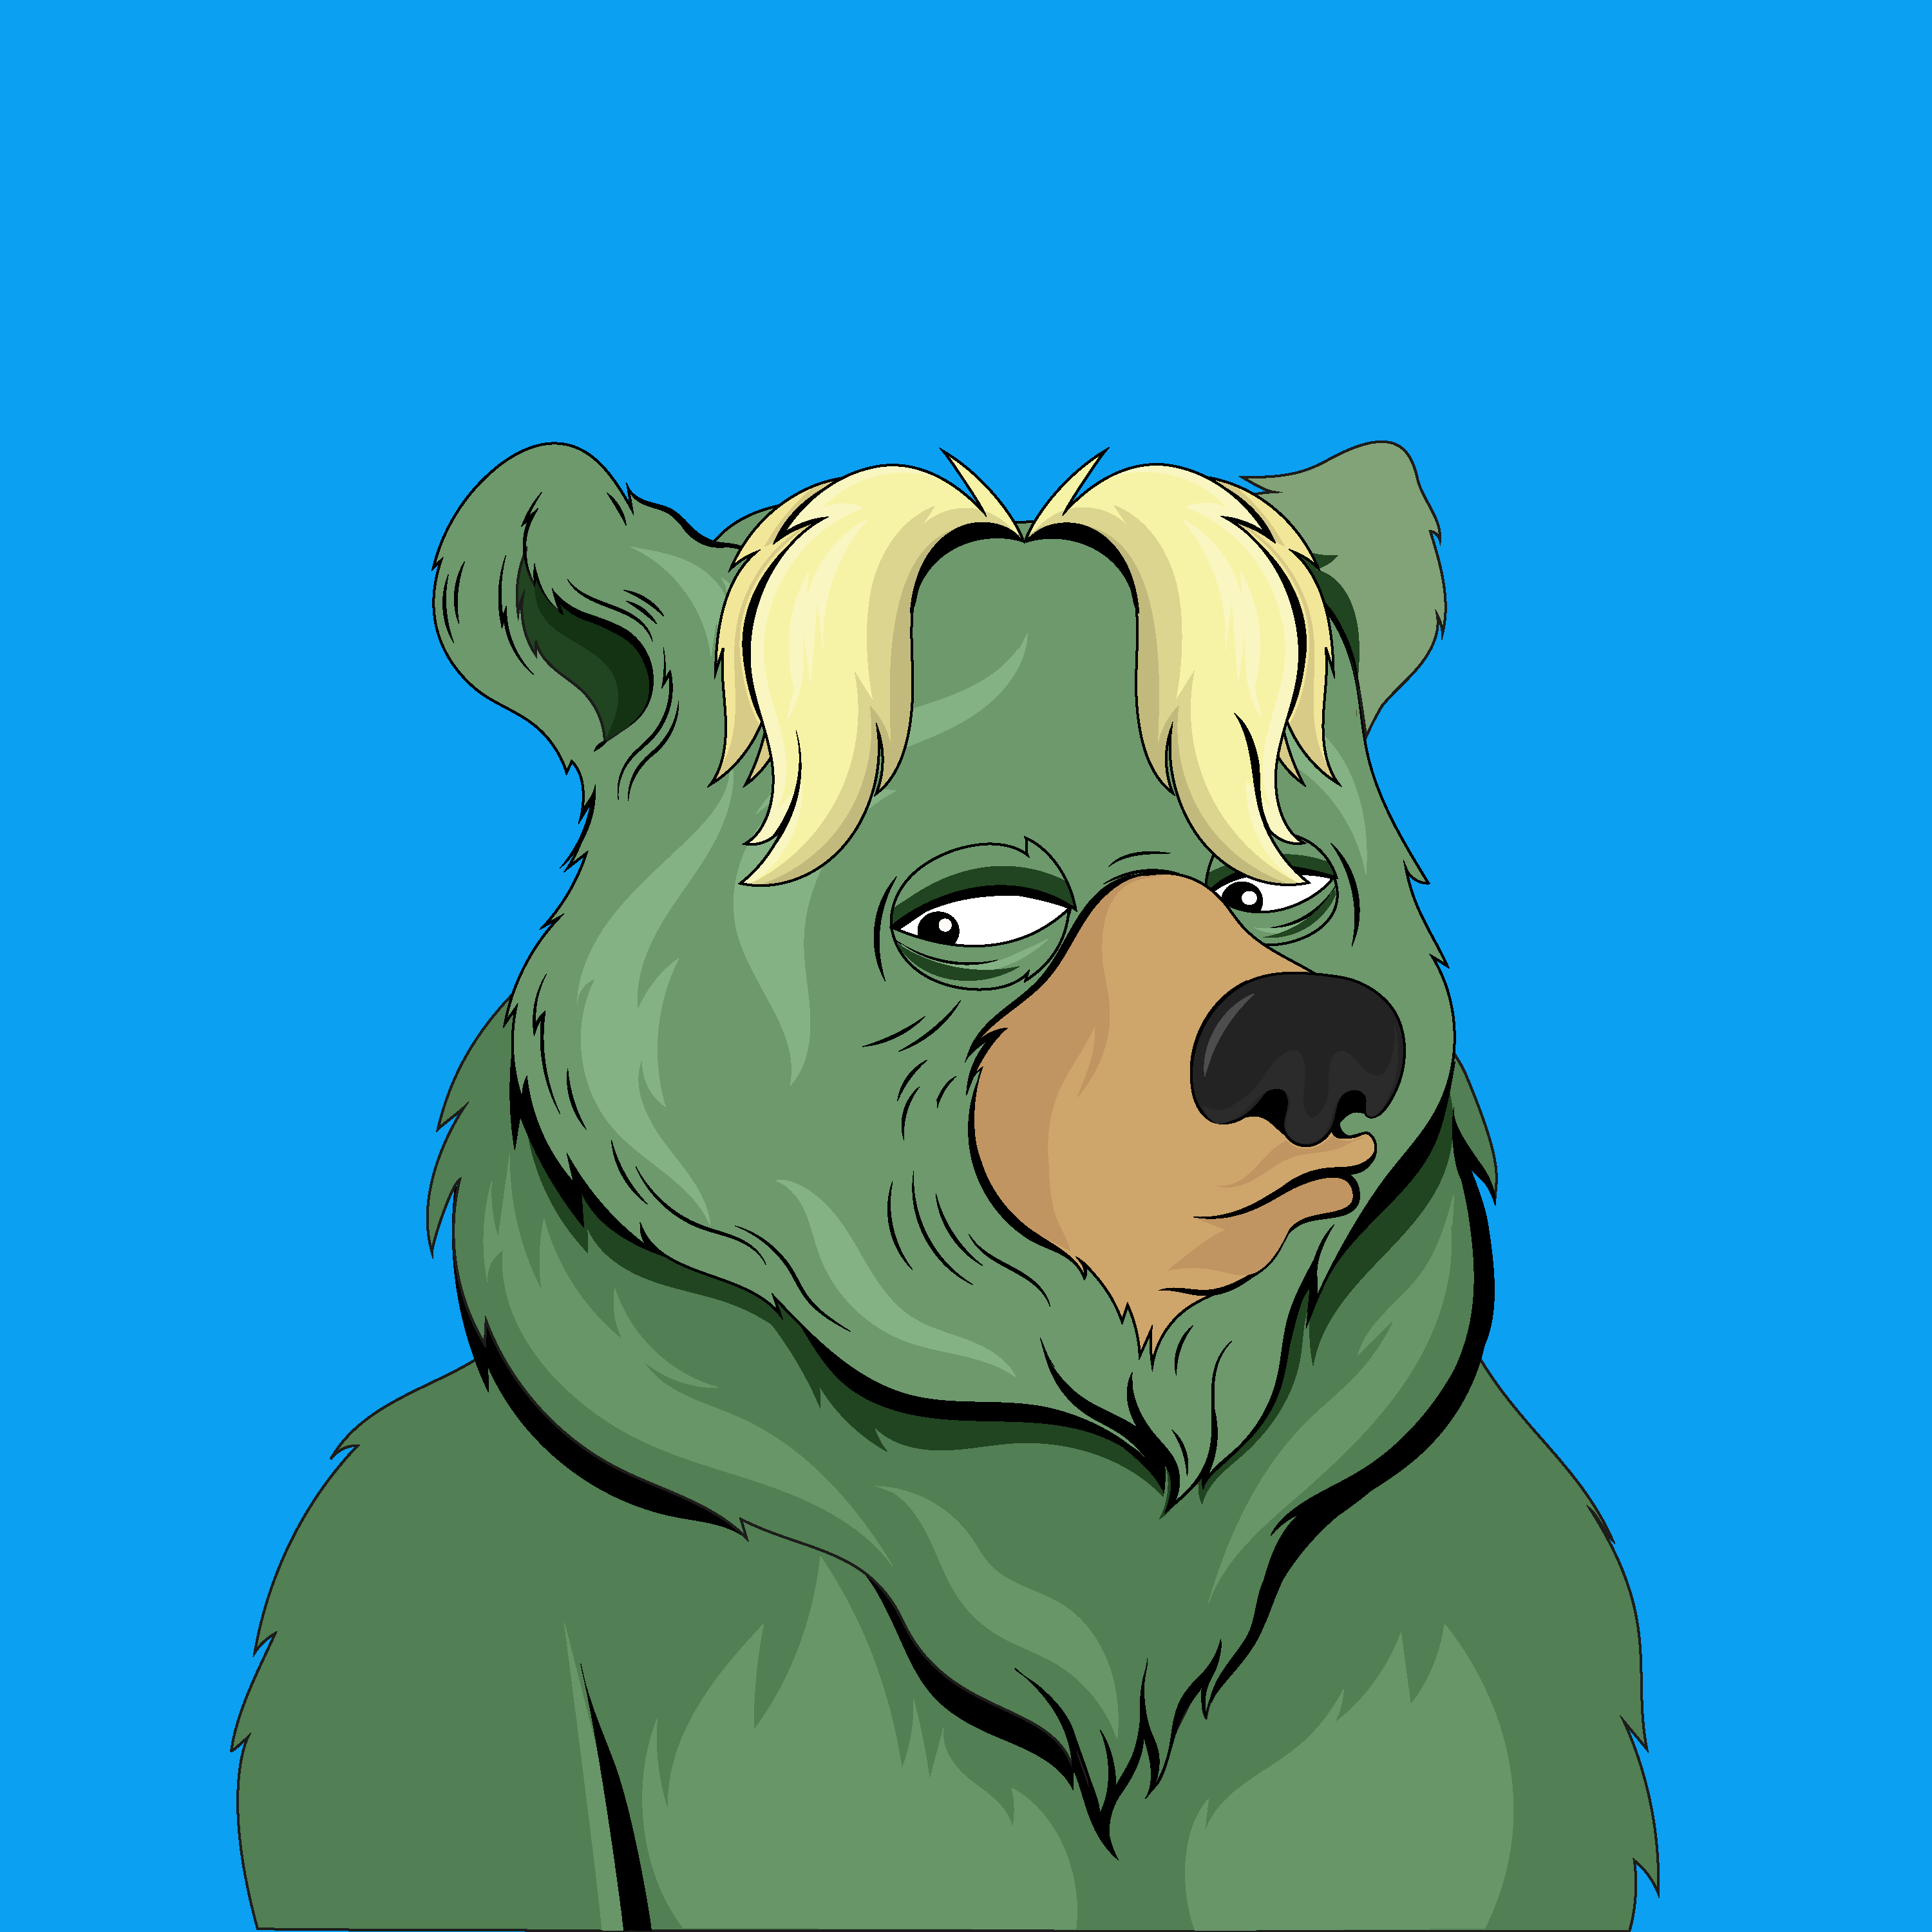 Fancy Bears Metaverse - Collection